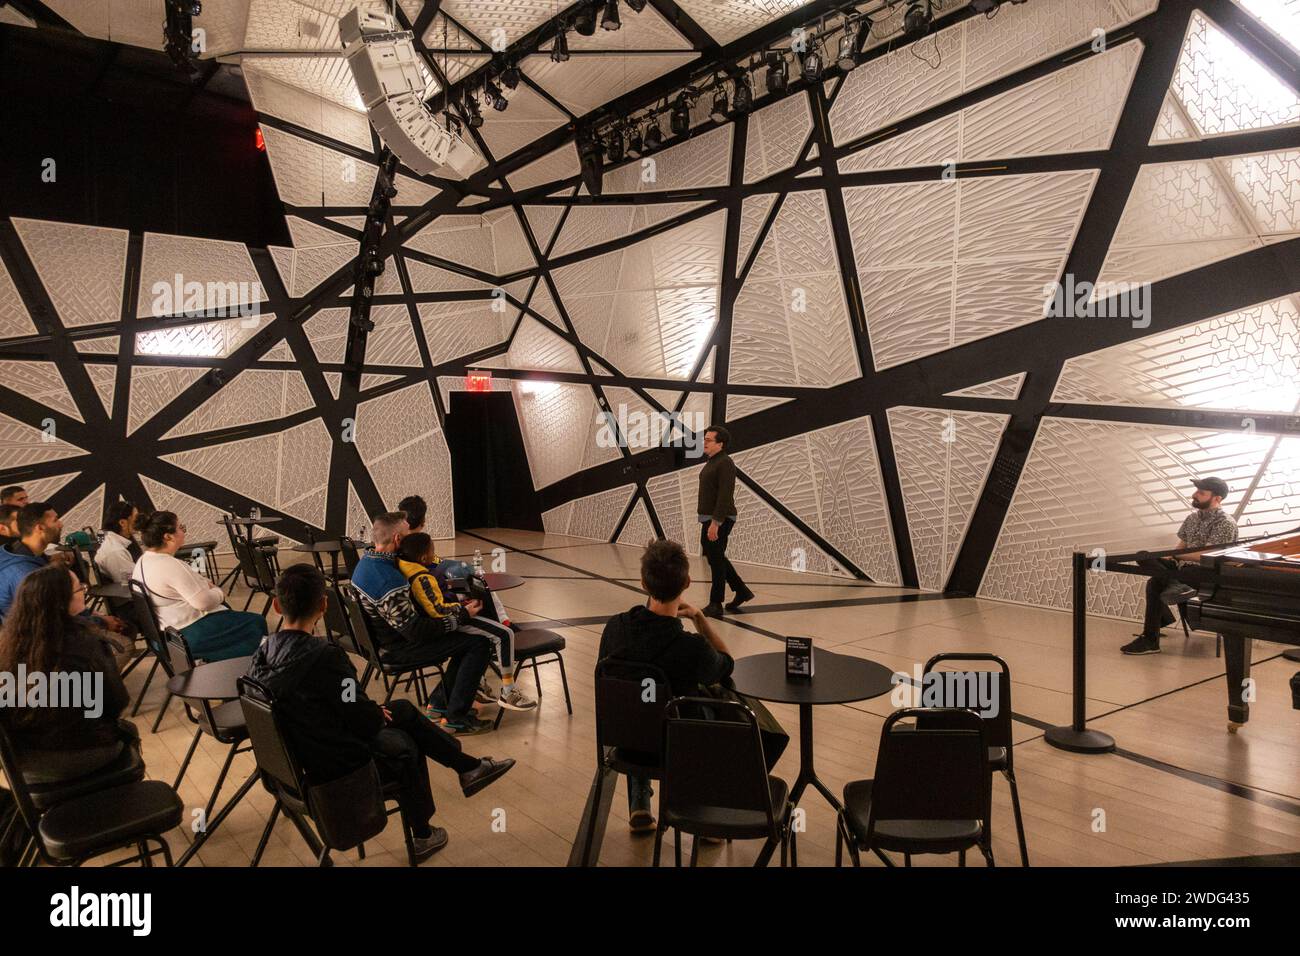 National Sawdust nonprofit music producer and venue space in Williamsburg Brooklyn Stock Photo